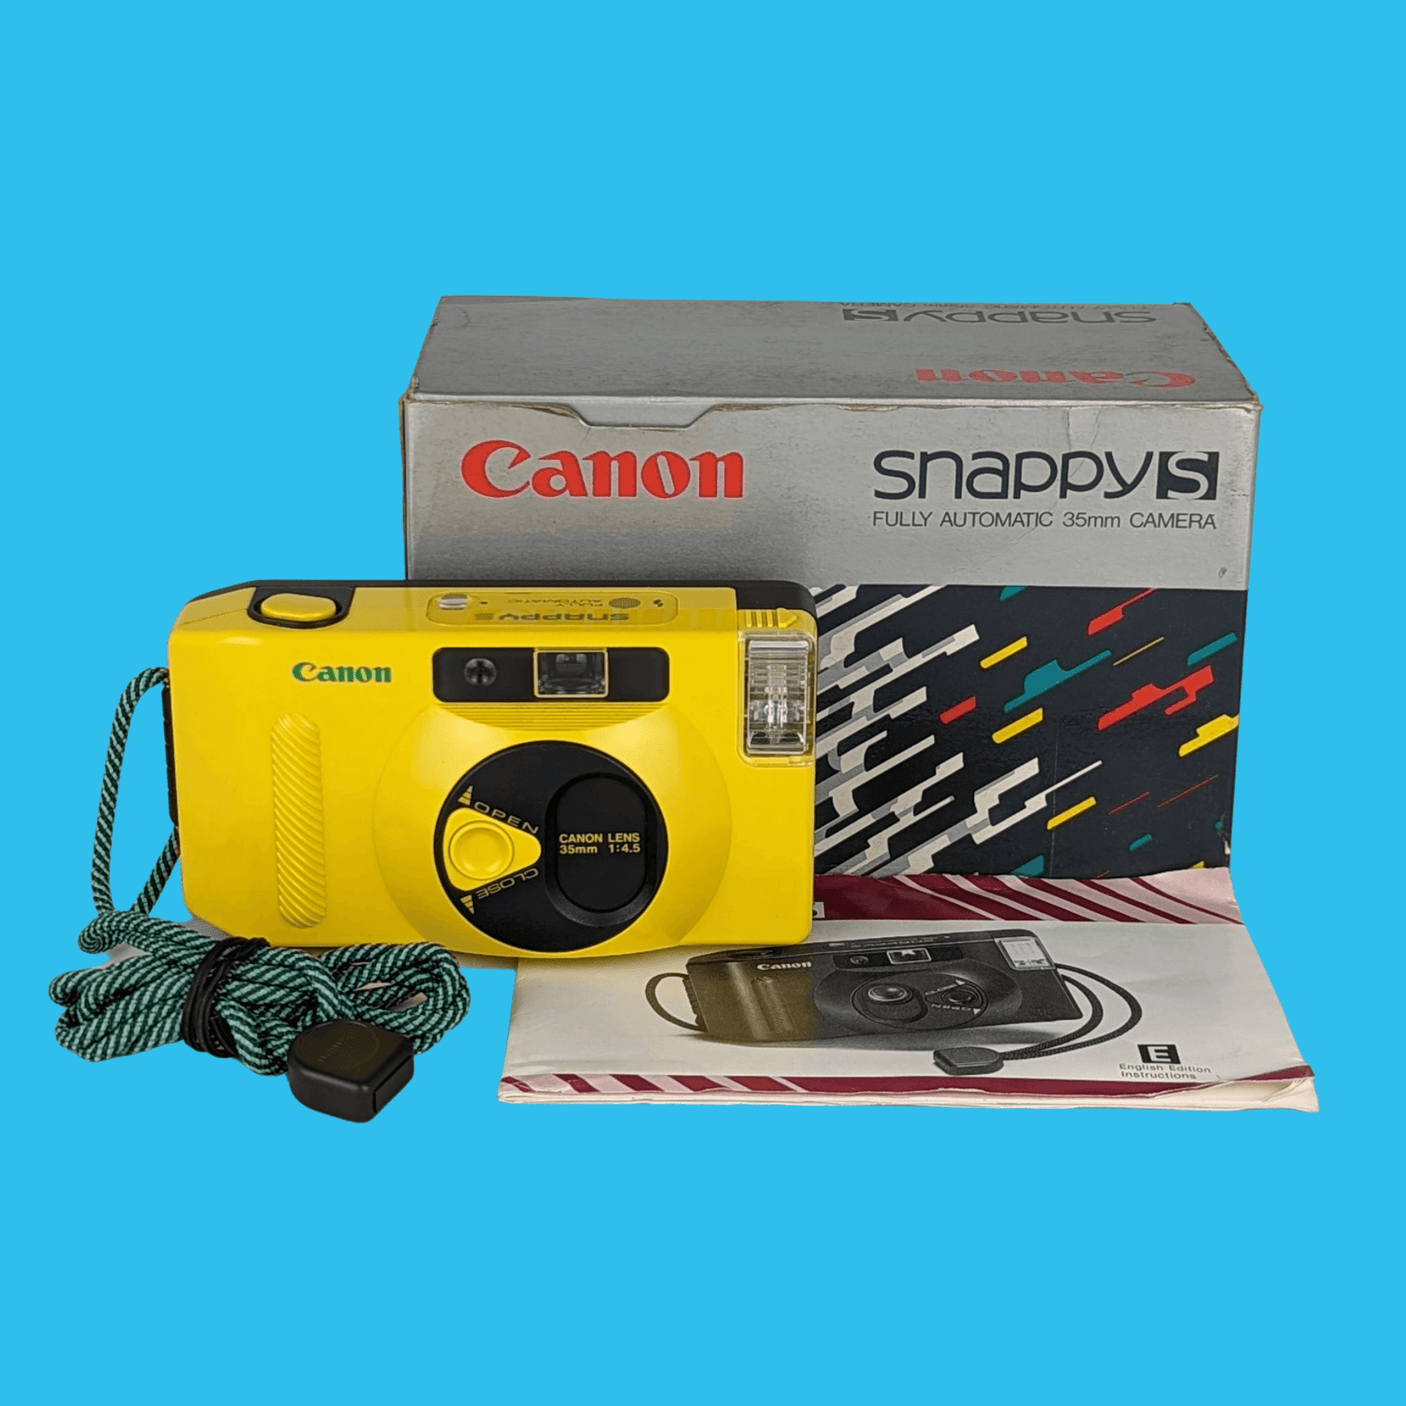 BRAND NEW - Canon Snappy S 35mm Film Camera Point and Shoot - Yellow